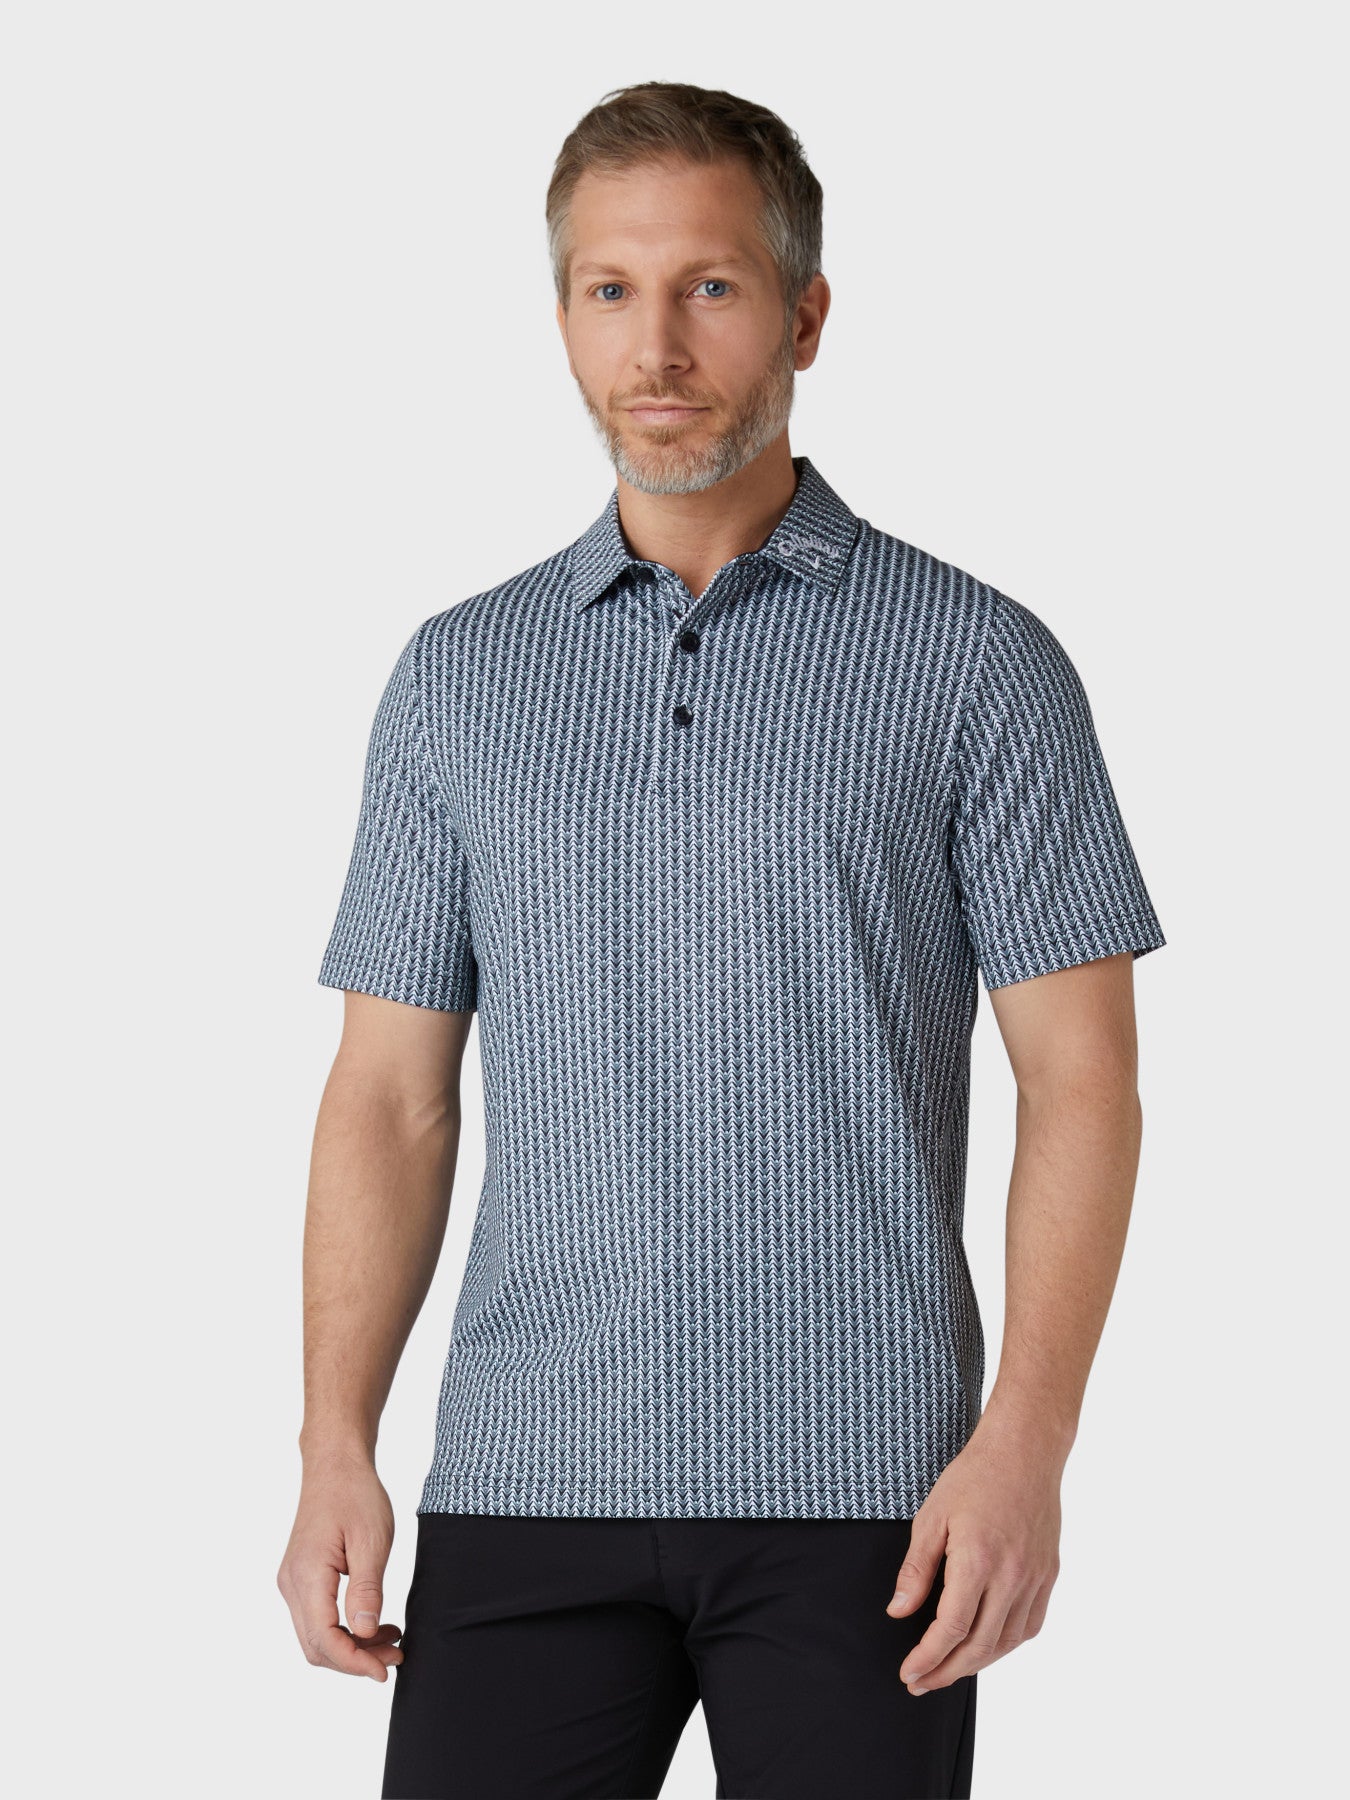 View Mens Chev And Ball All Over Print Polo In Caviar Caviar S information